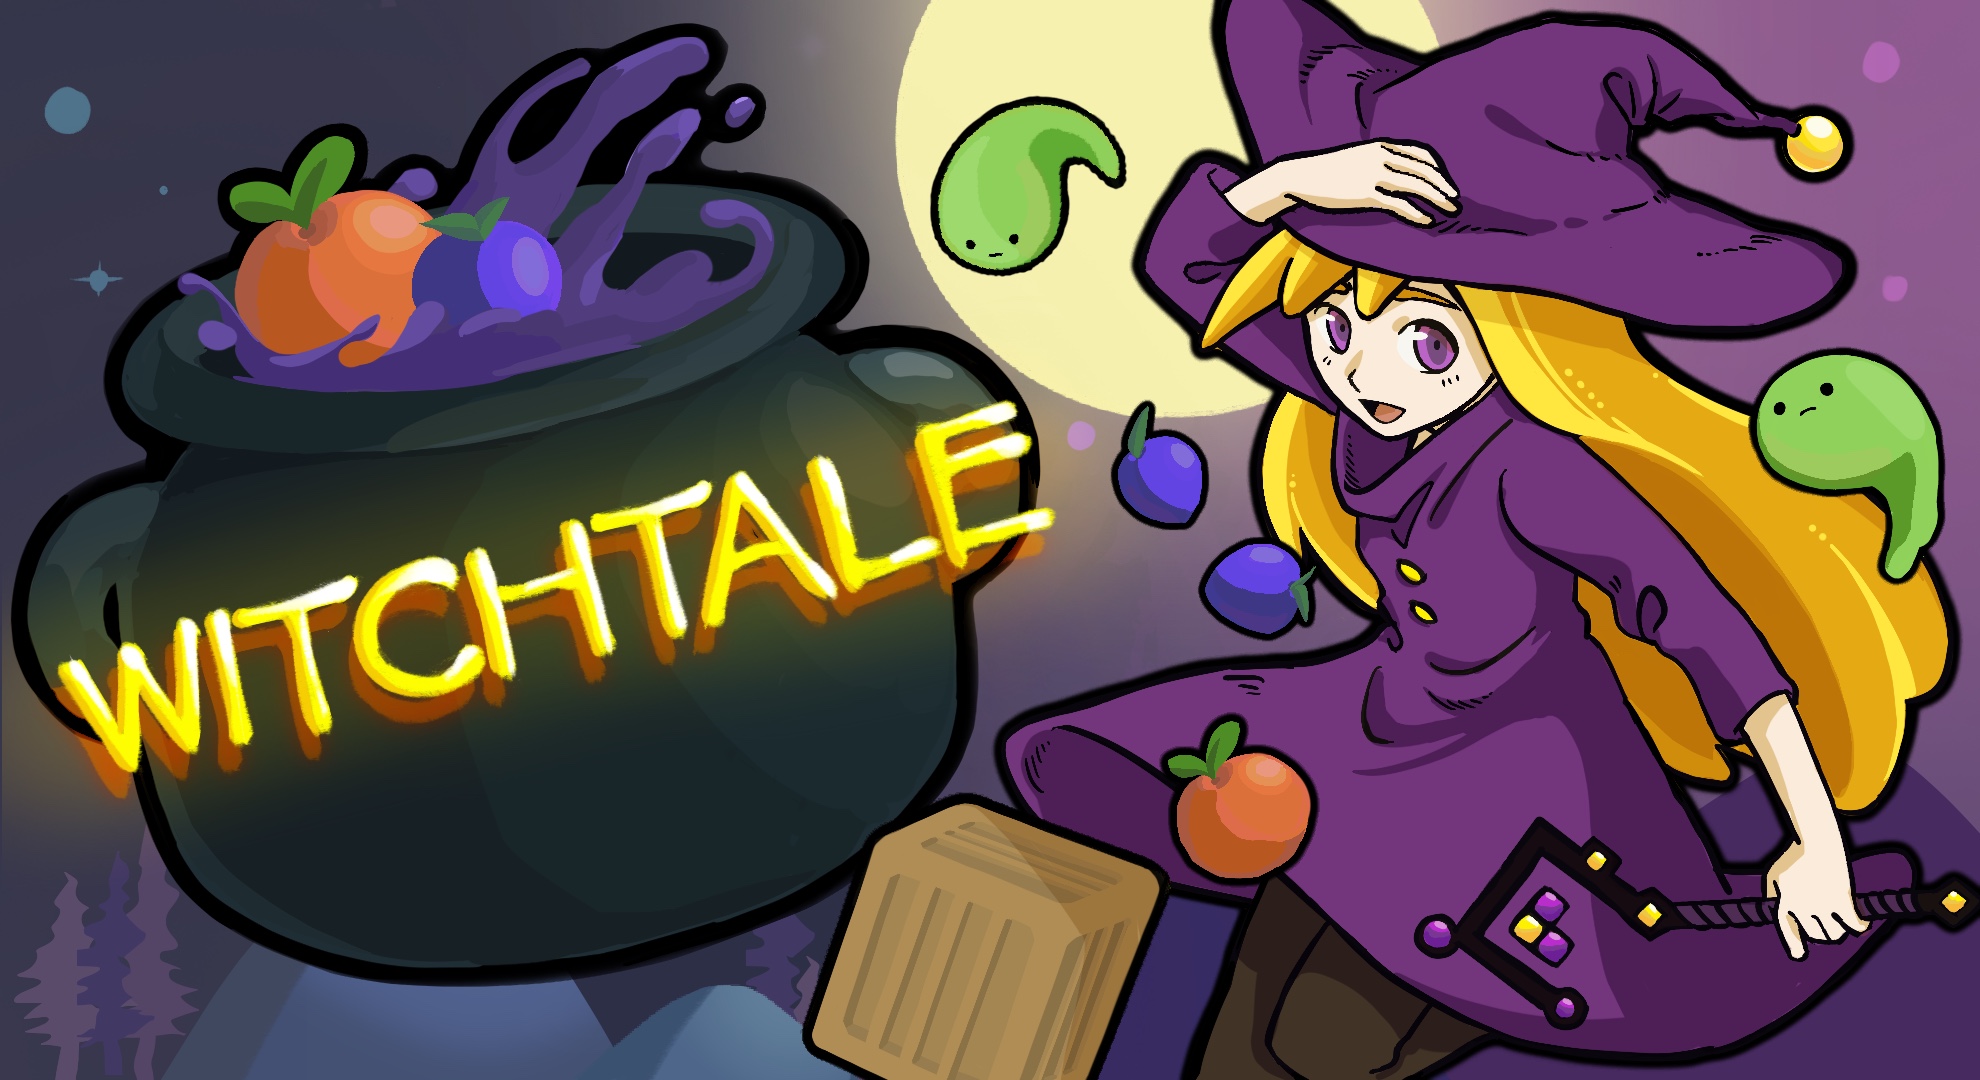 WITCHTALE